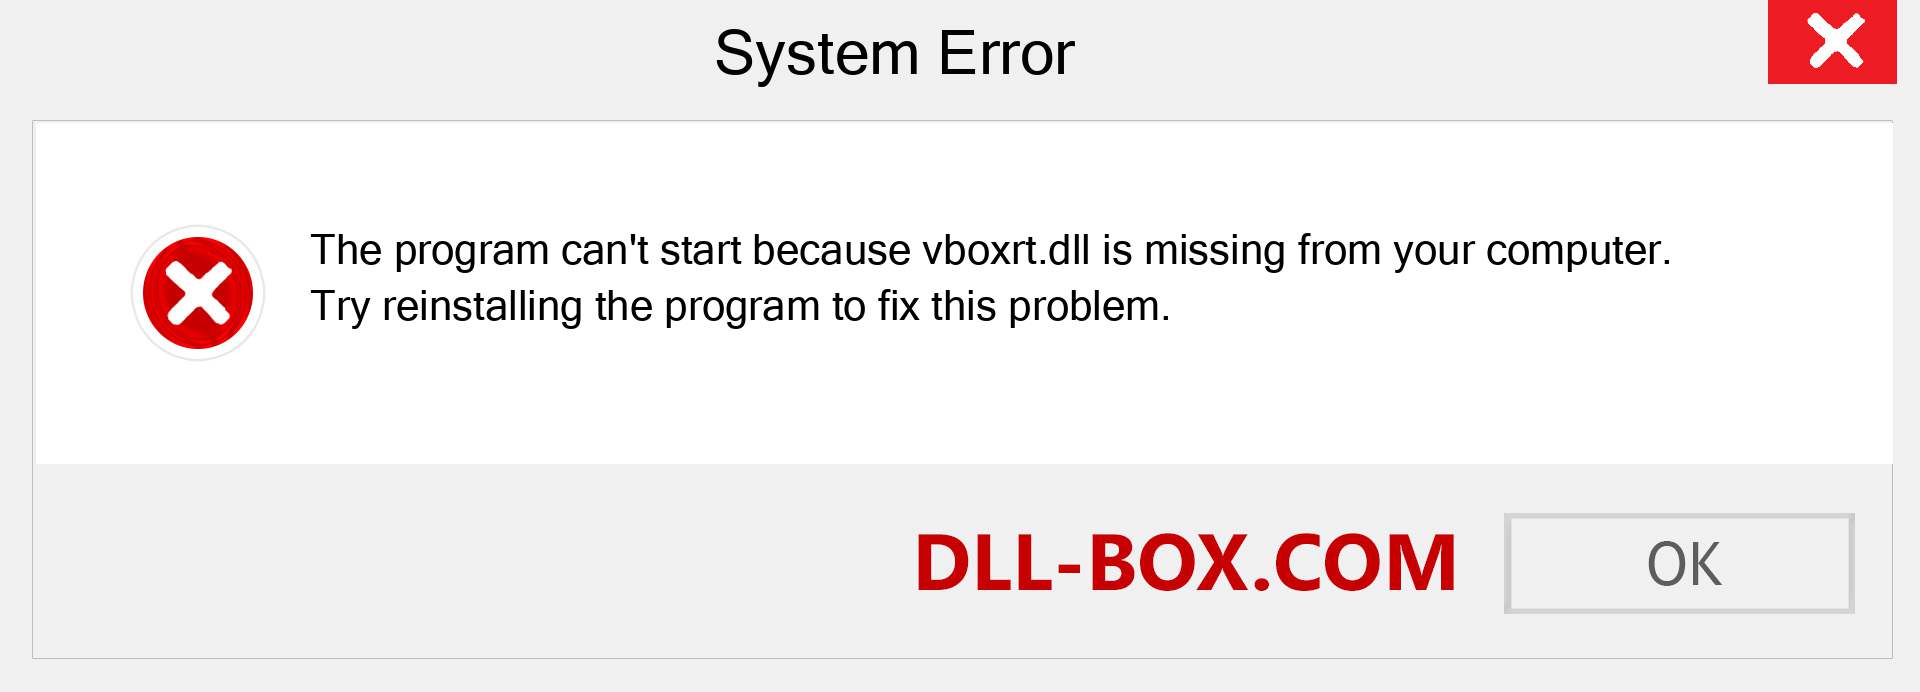  vboxrt.dll file is missing?. Download for Windows 7, 8, 10 - Fix  vboxrt dll Missing Error on Windows, photos, images